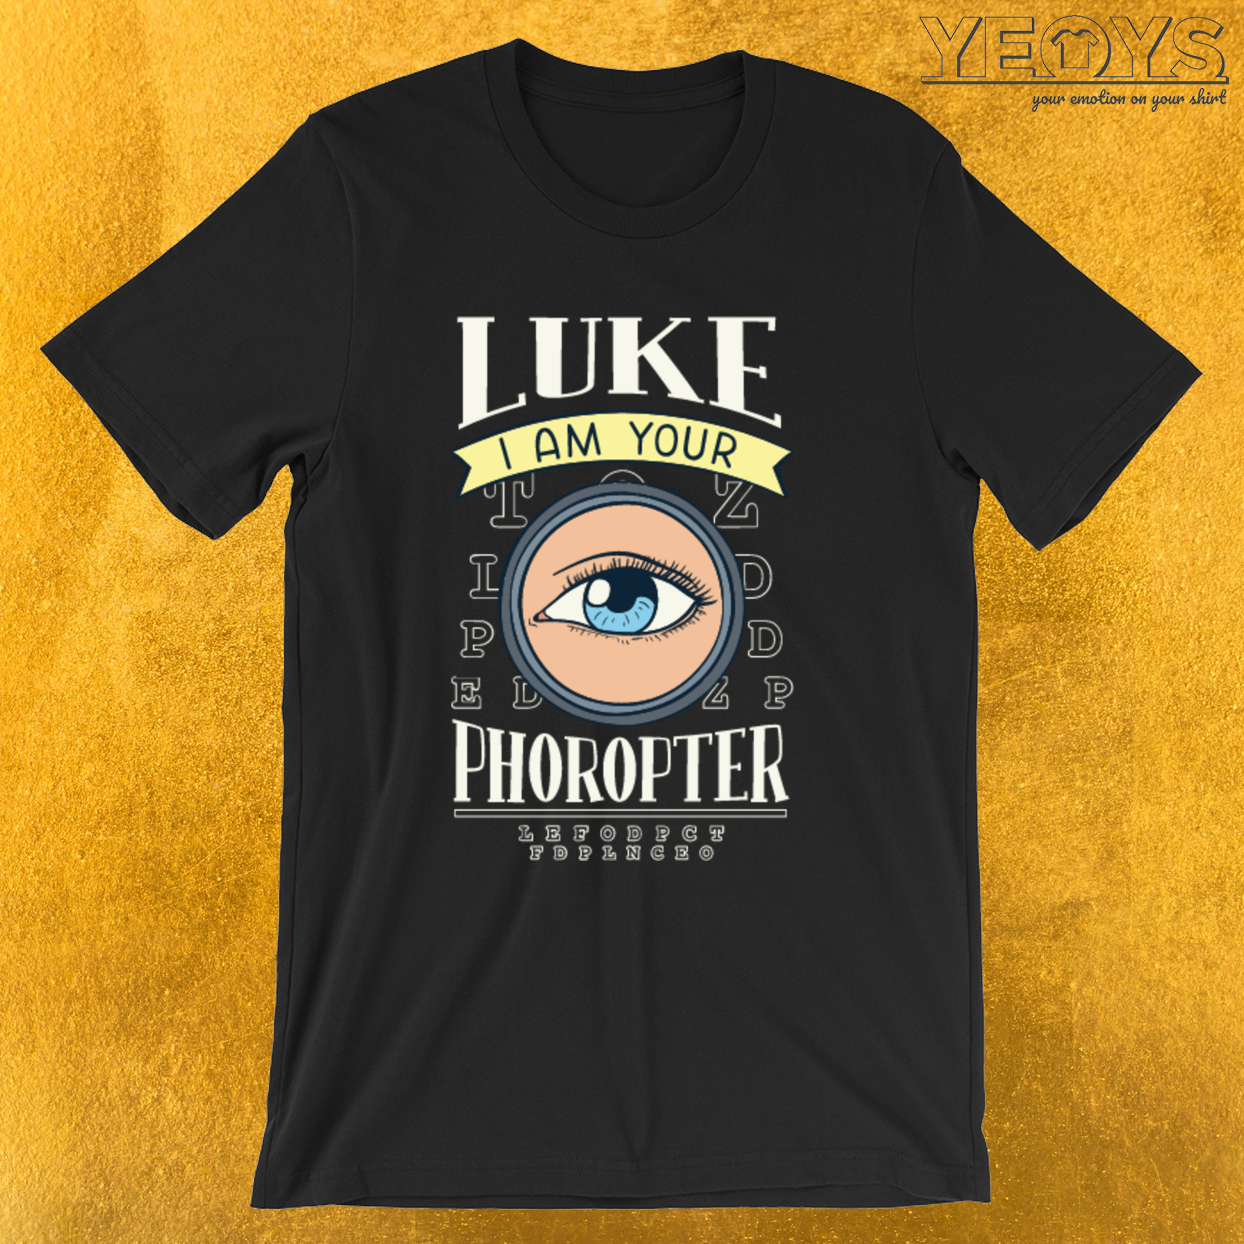 Luke I Am Your Phoropter – Funny Medical Quotes Tee